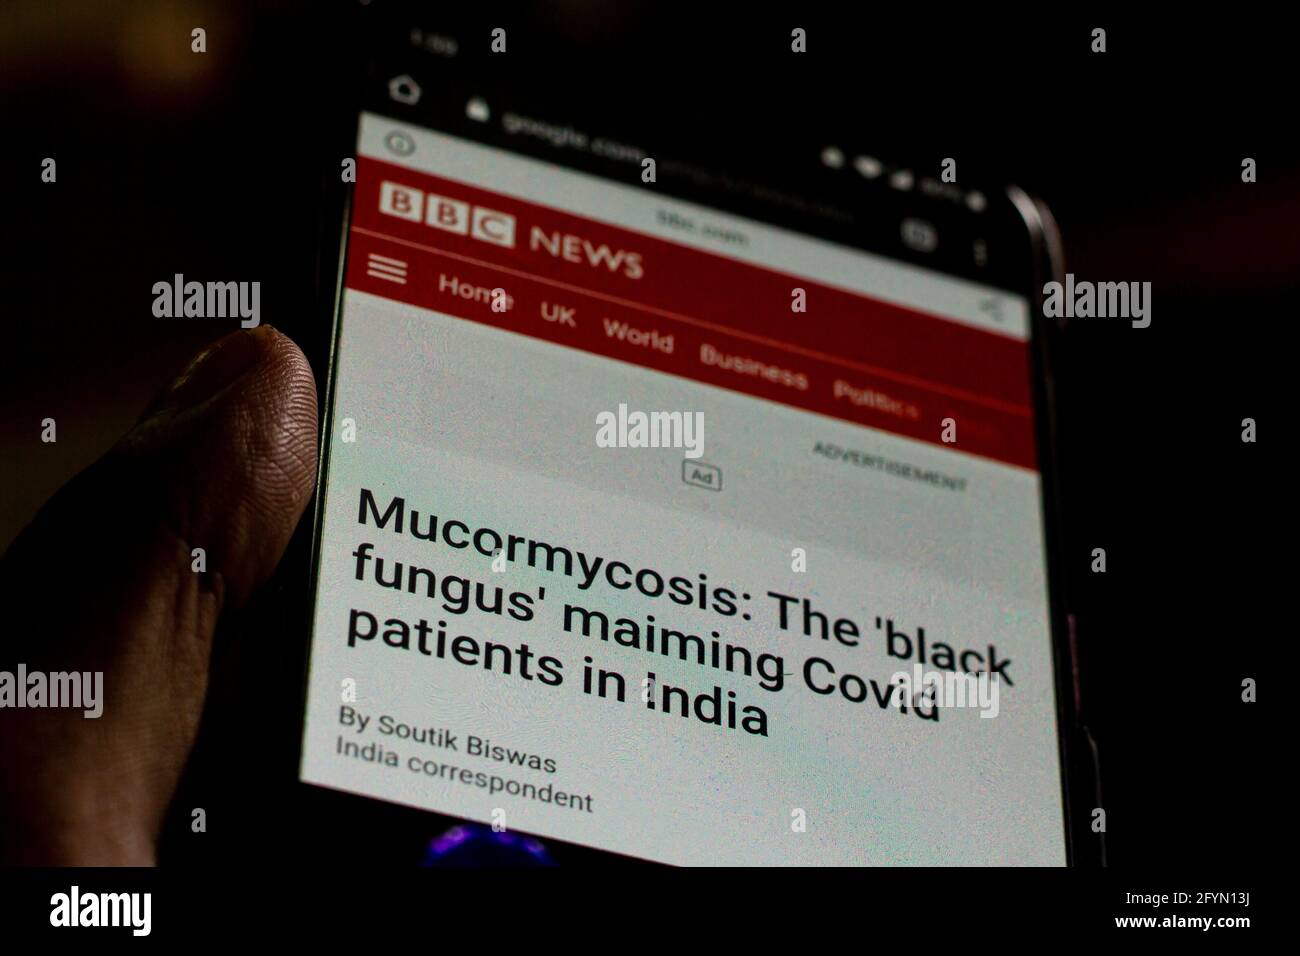 mucormycosis News on the phone.Mobile phone in hands. selective focus and chromatic aberration effects. Stock Photo